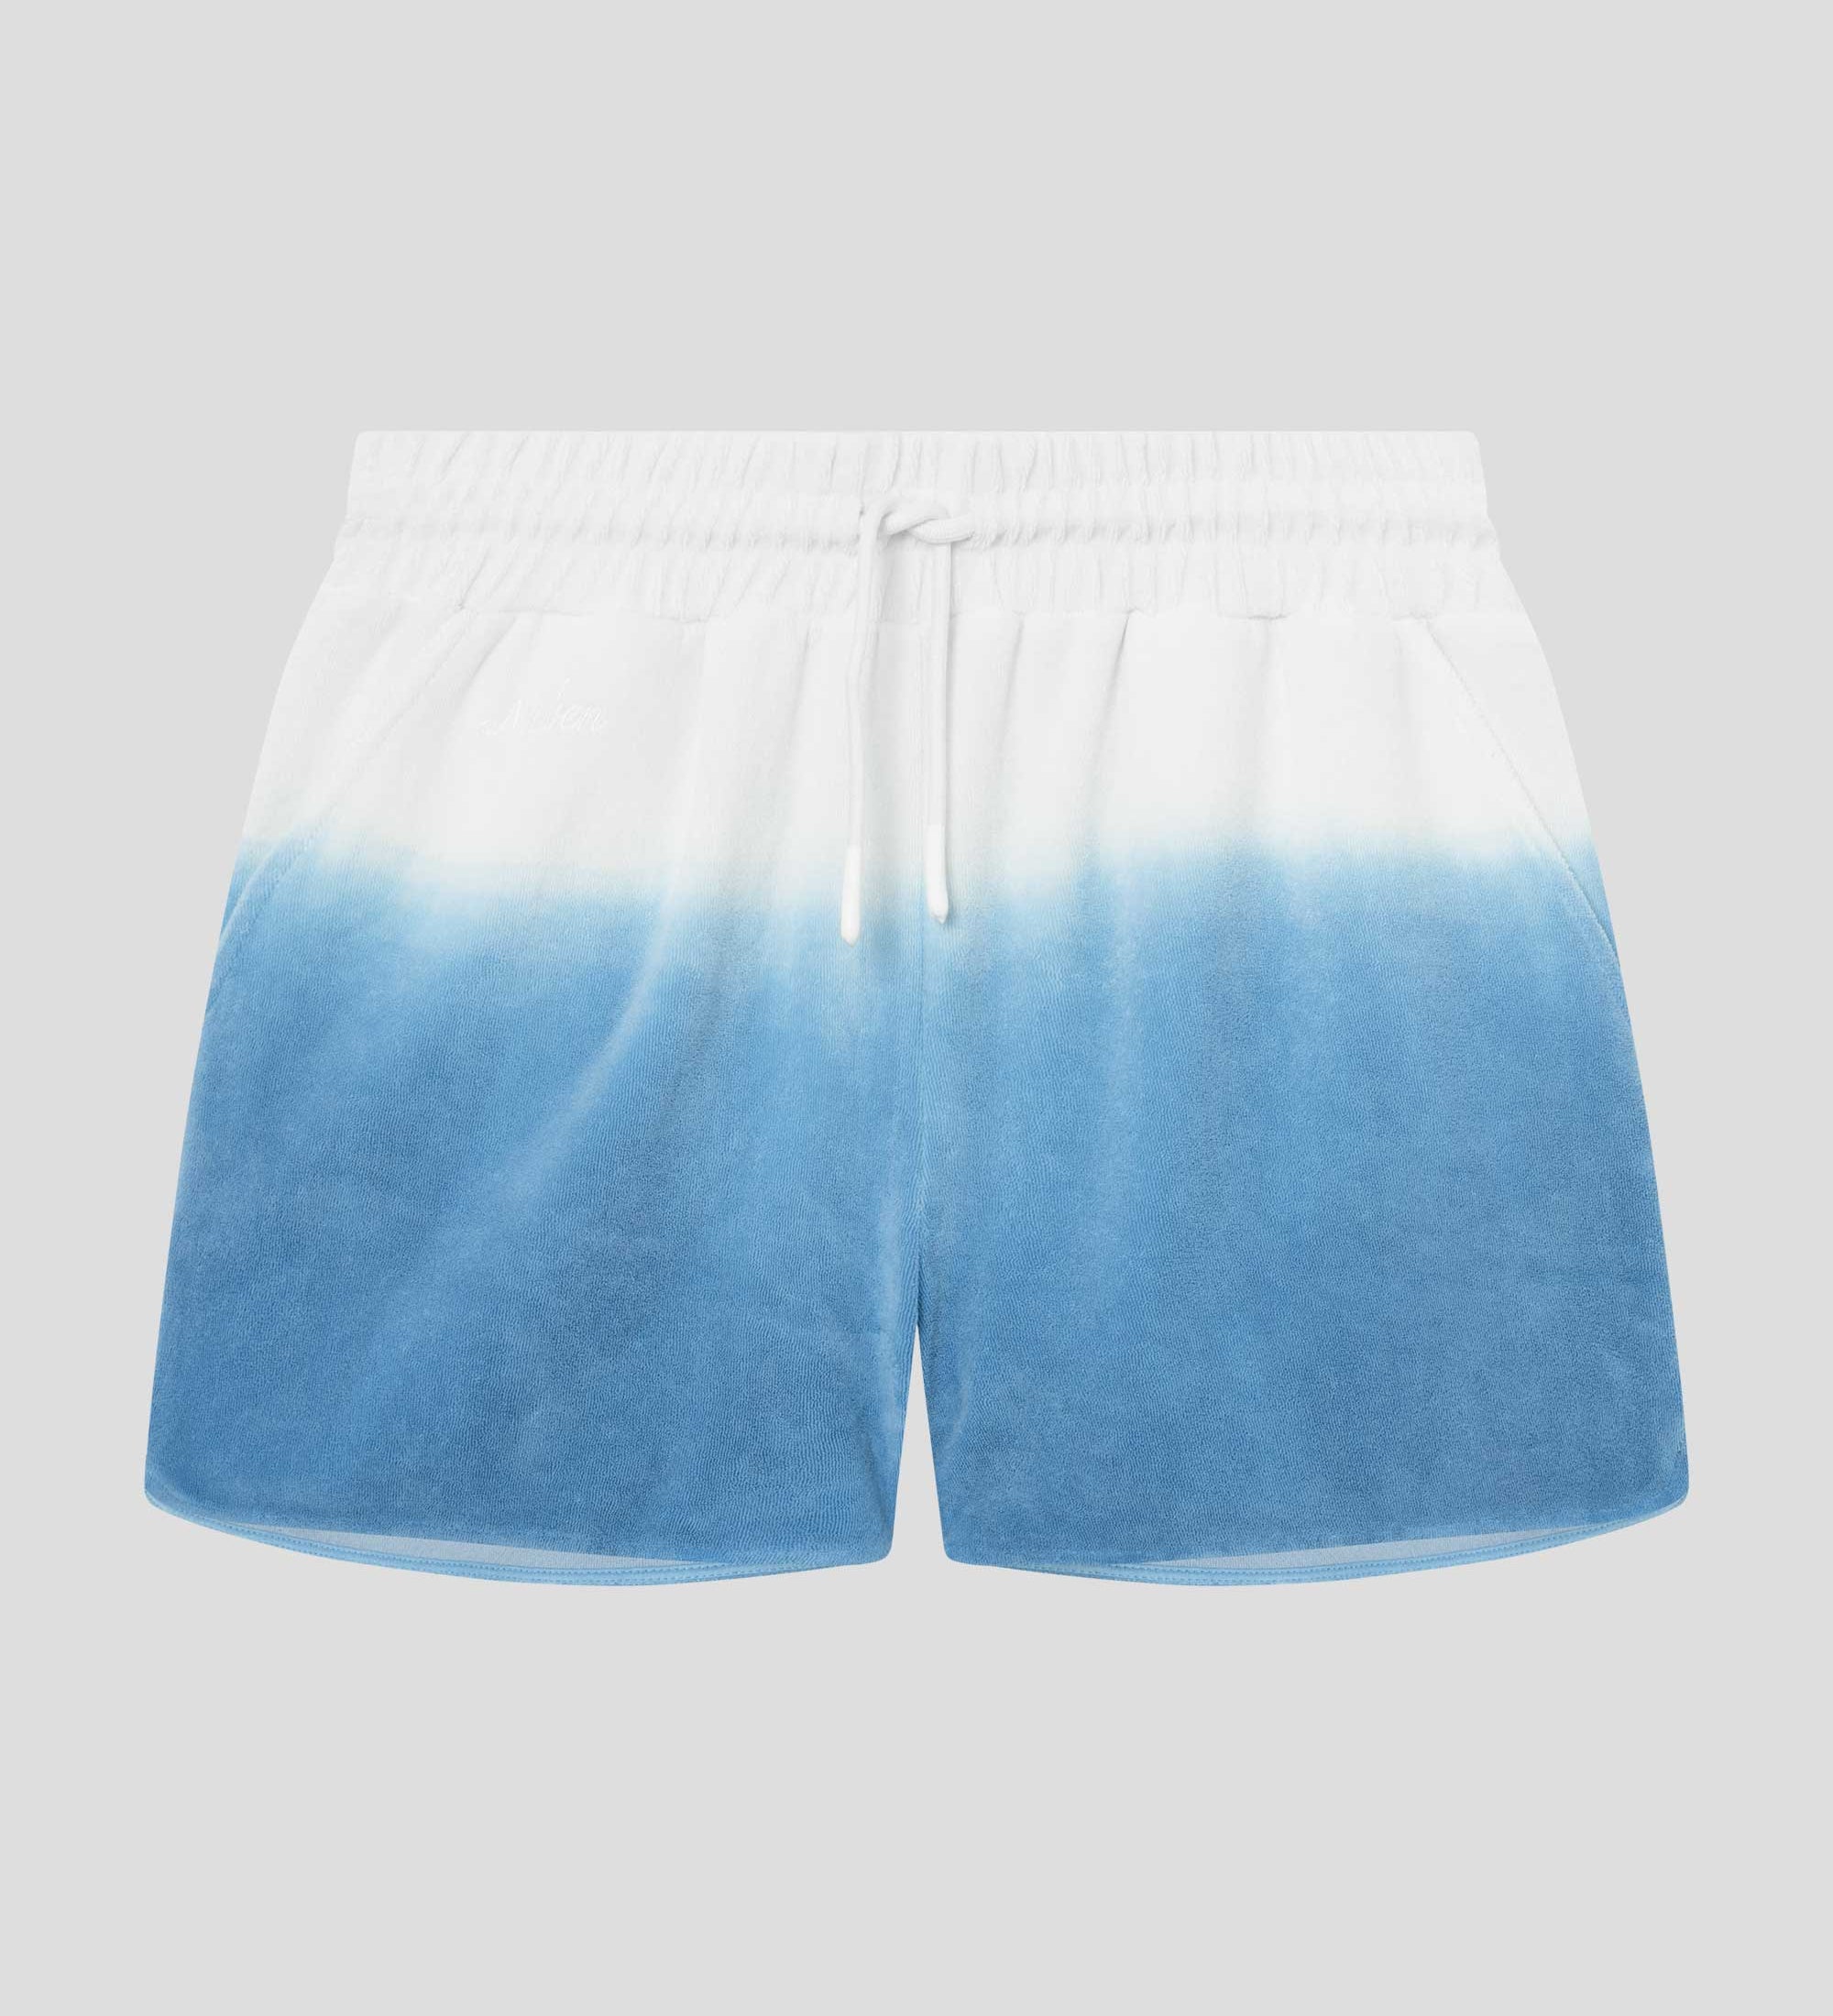 White and sky blue low cut shorts in terry toweling fabric with drawstring and two side pockets.